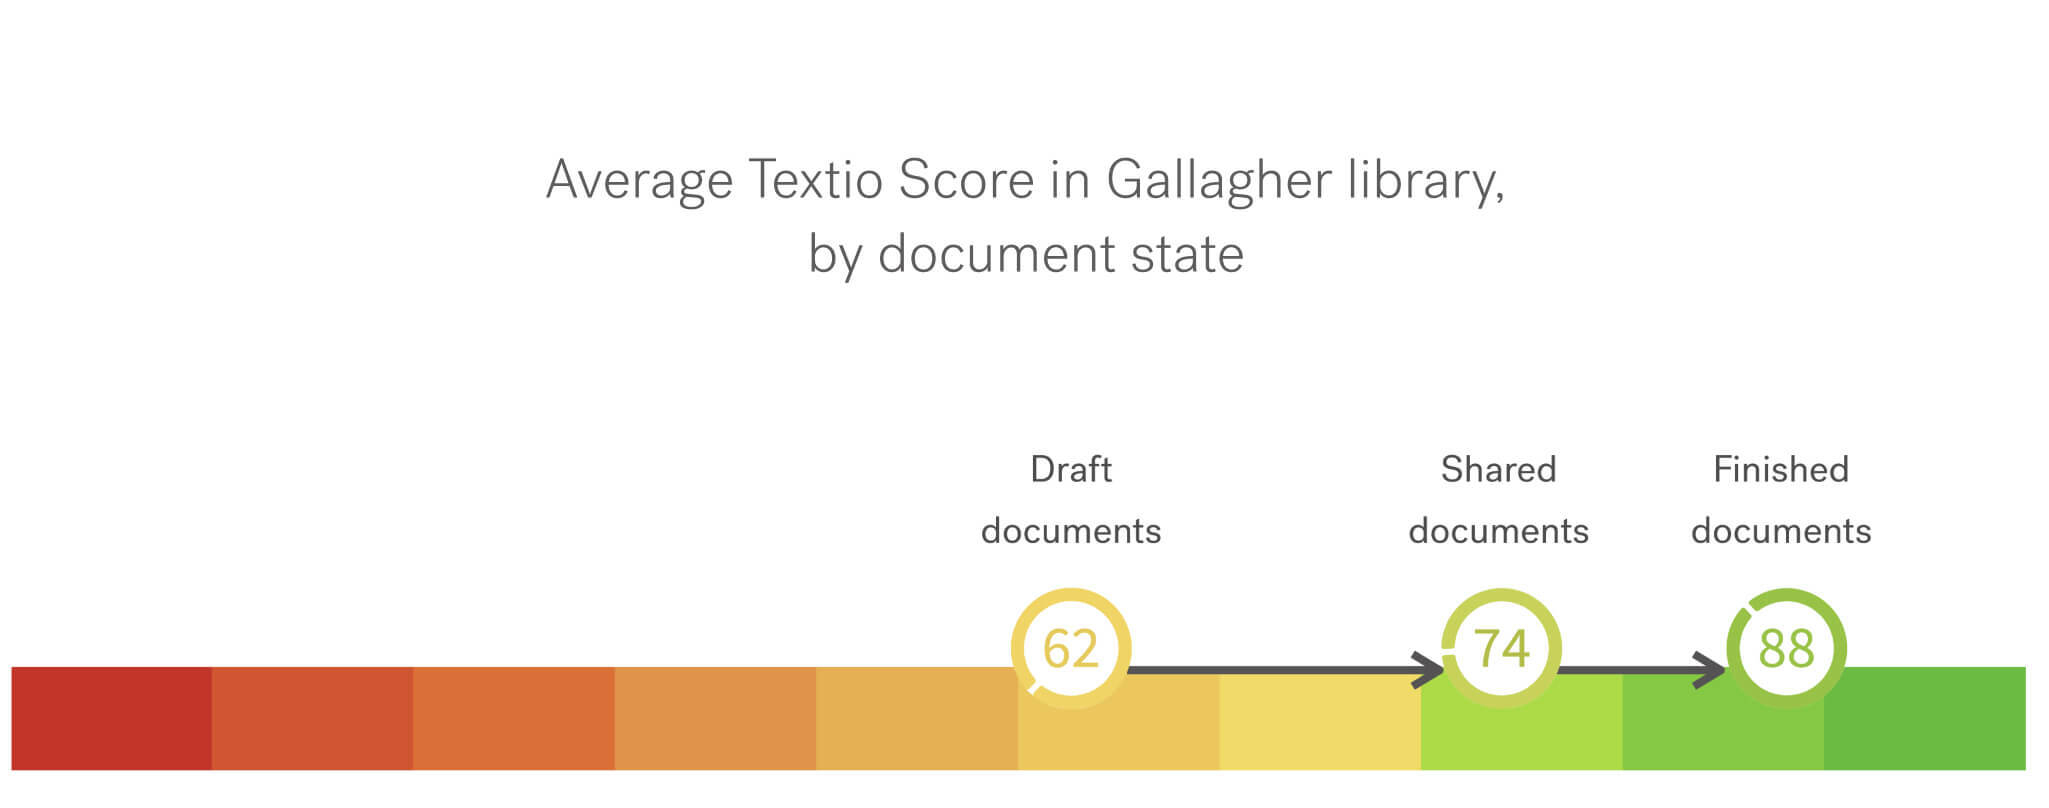 Graph of Average Textio Score in Gallagher library, by document state, showing increasing Textio Score as documents move from Draft to Shared to Finished